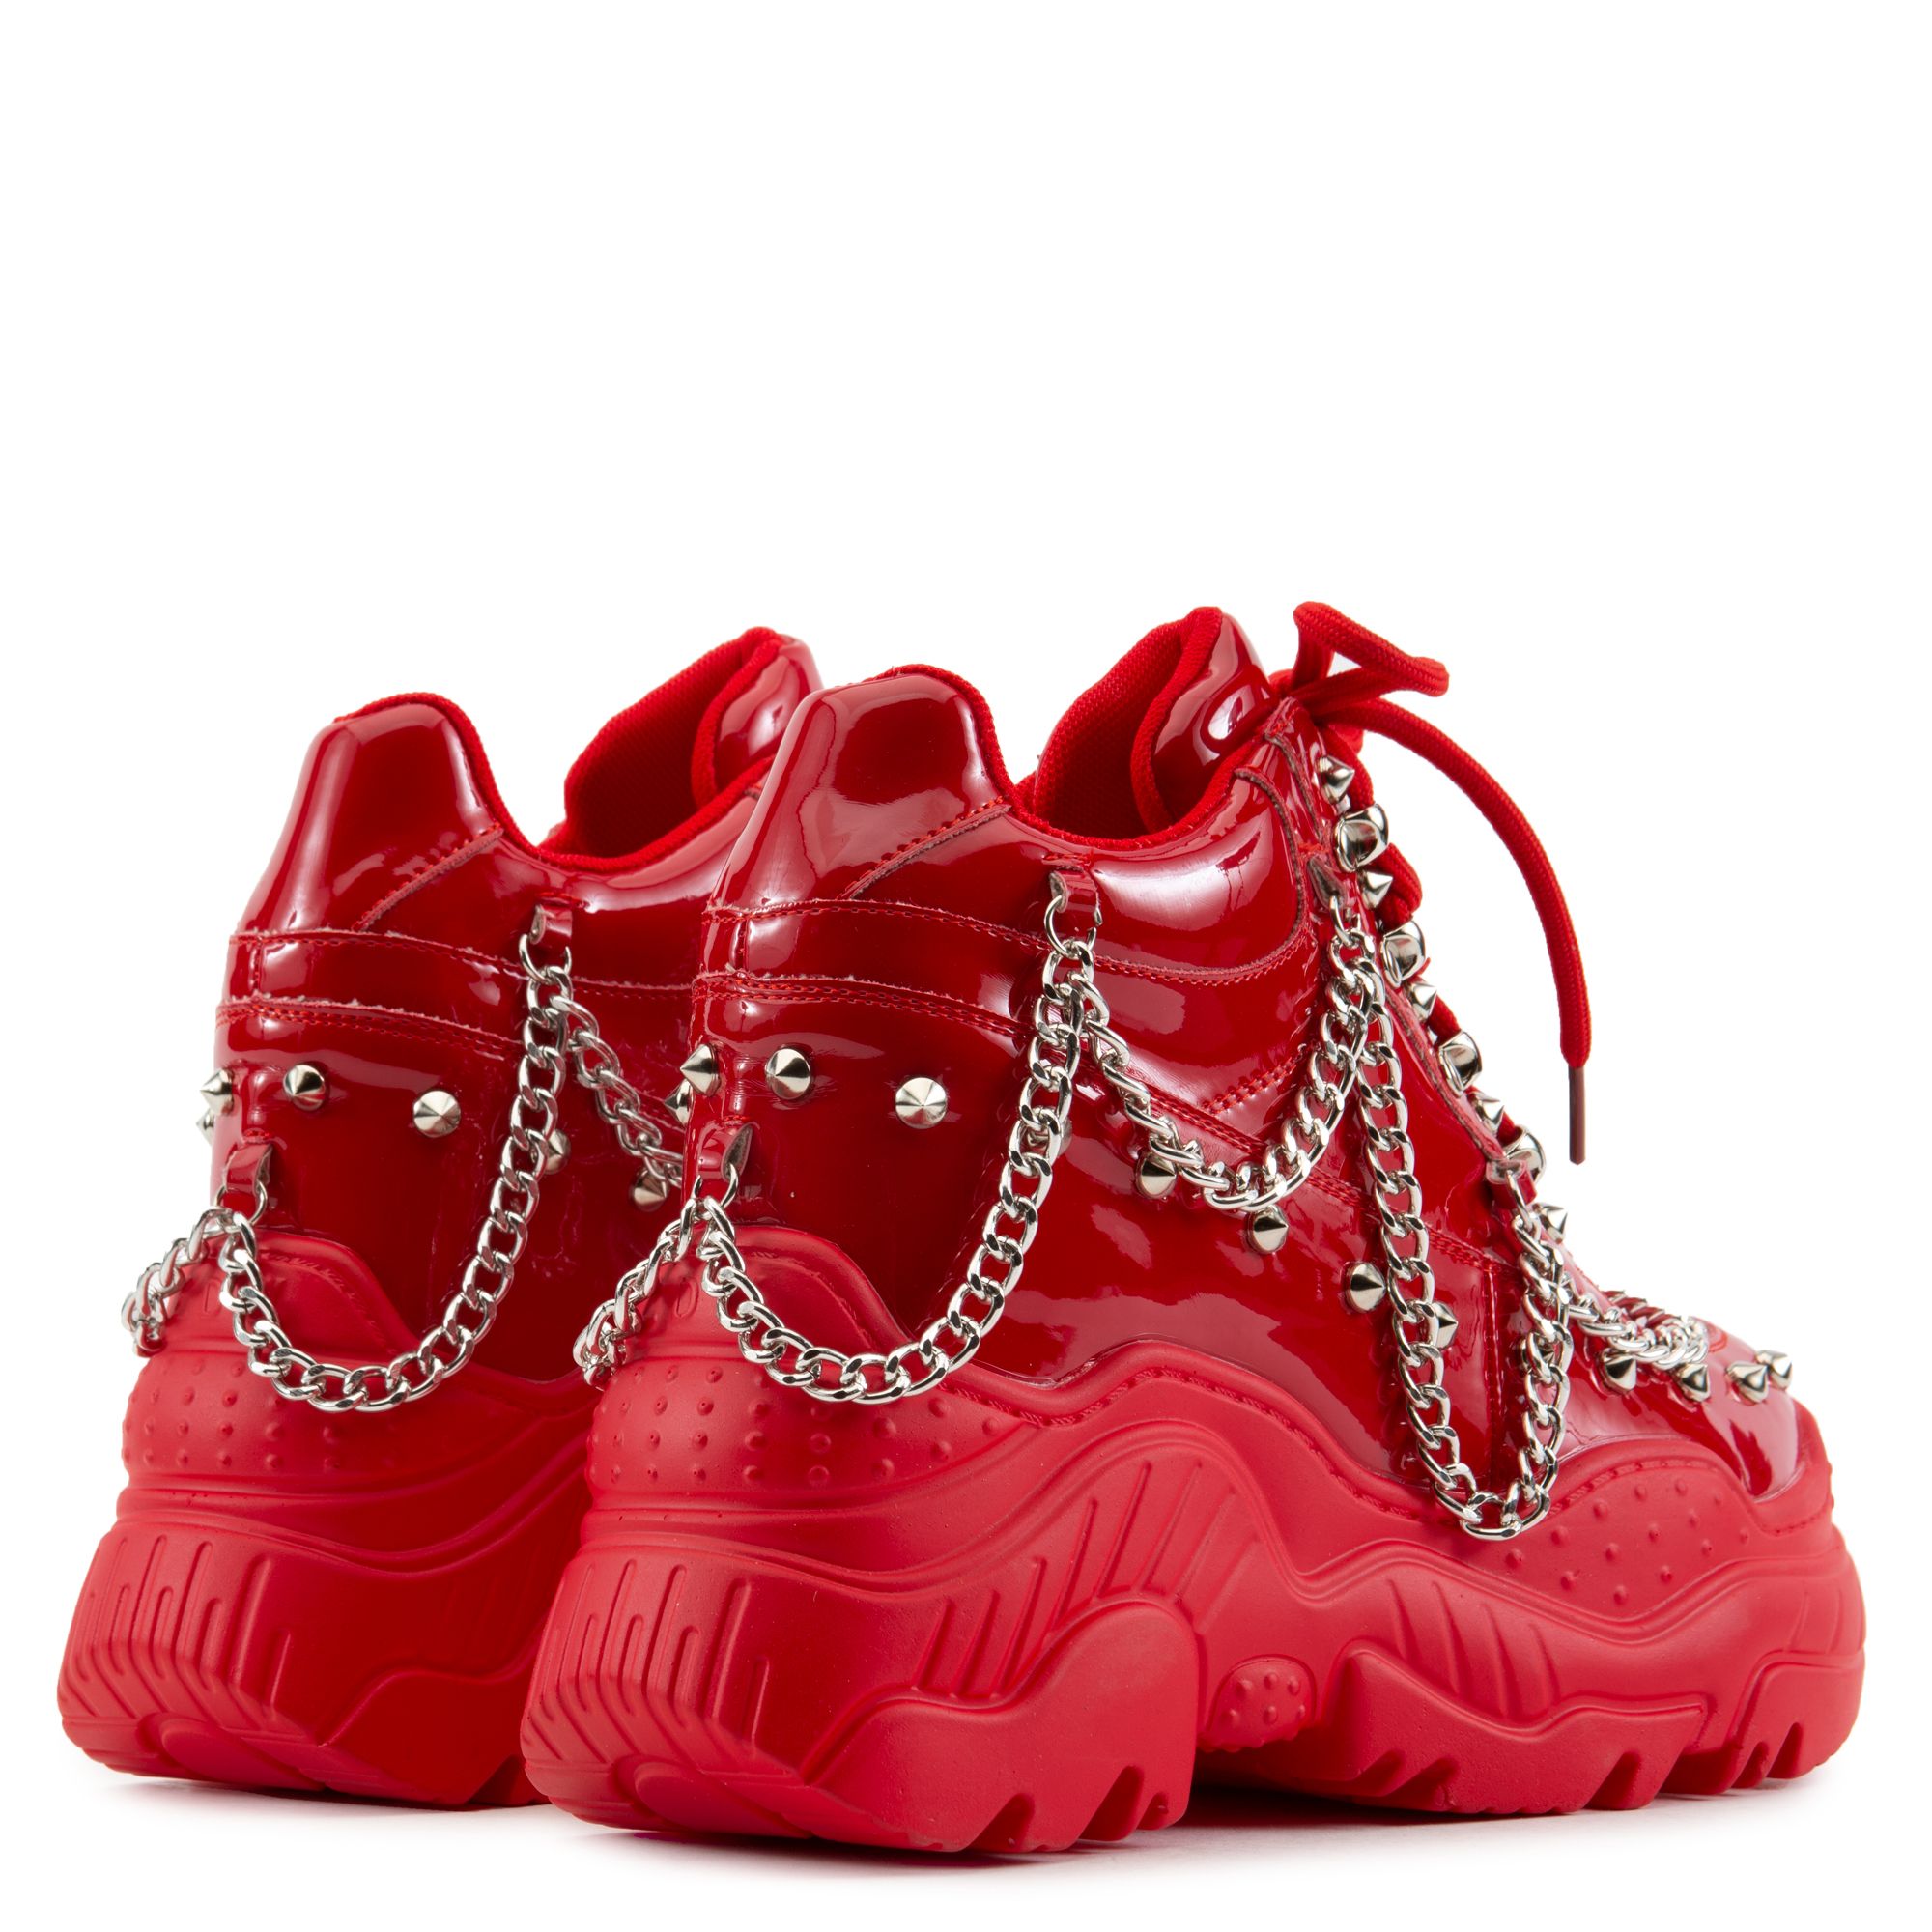 SPACE CANDY PLATFORM SNEAKERS WITH STUDS SPACE CANDY-RED